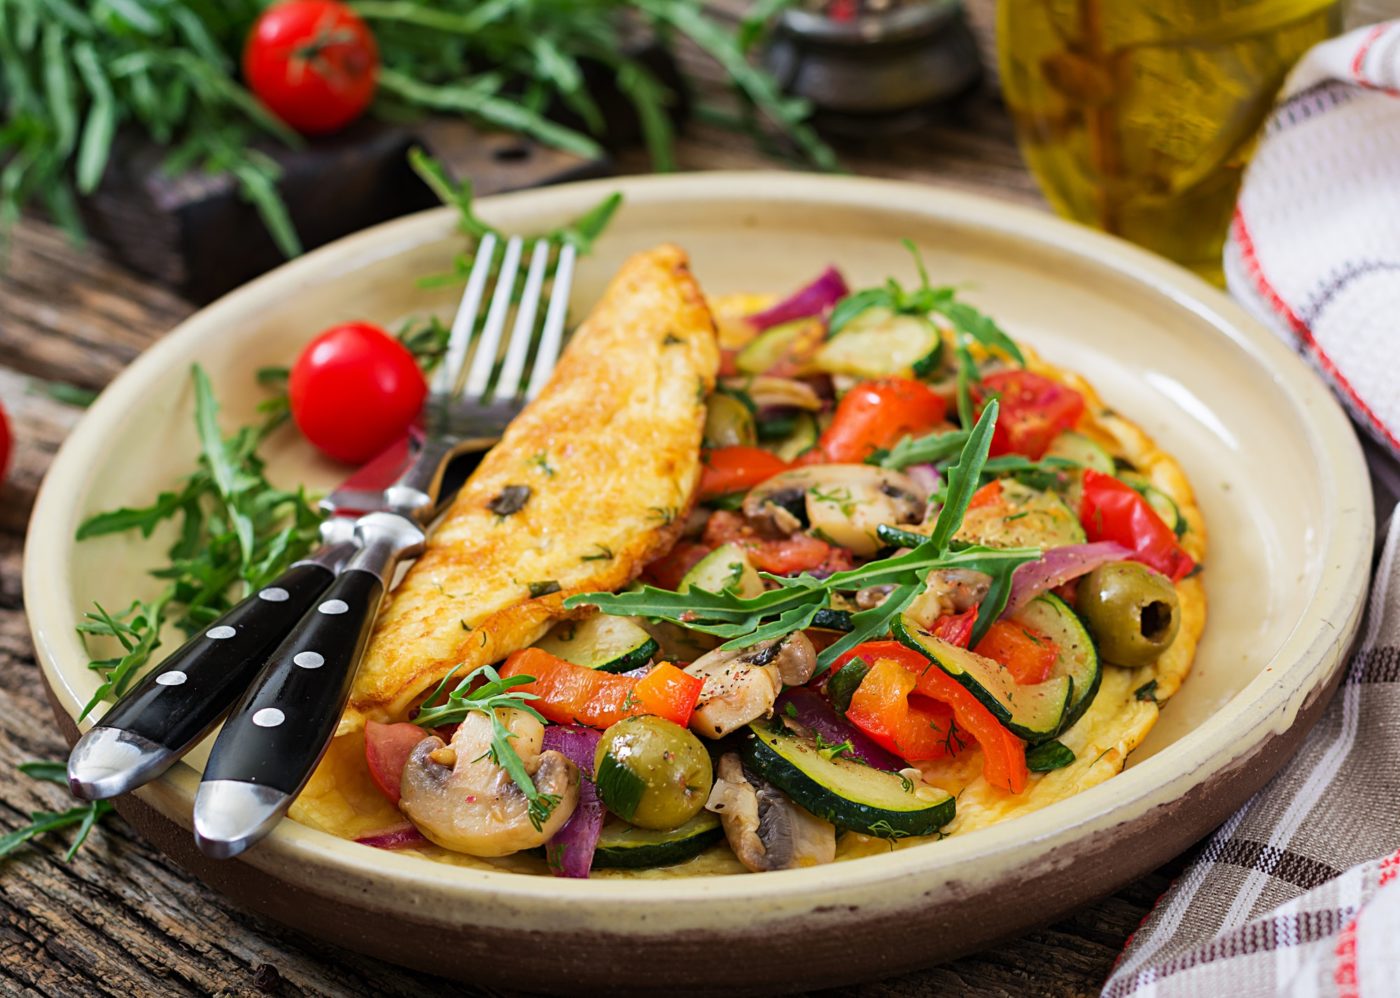 Omelet with tomatoes, zucchini and mushrooms. Omelette breakfast. Healthy food.